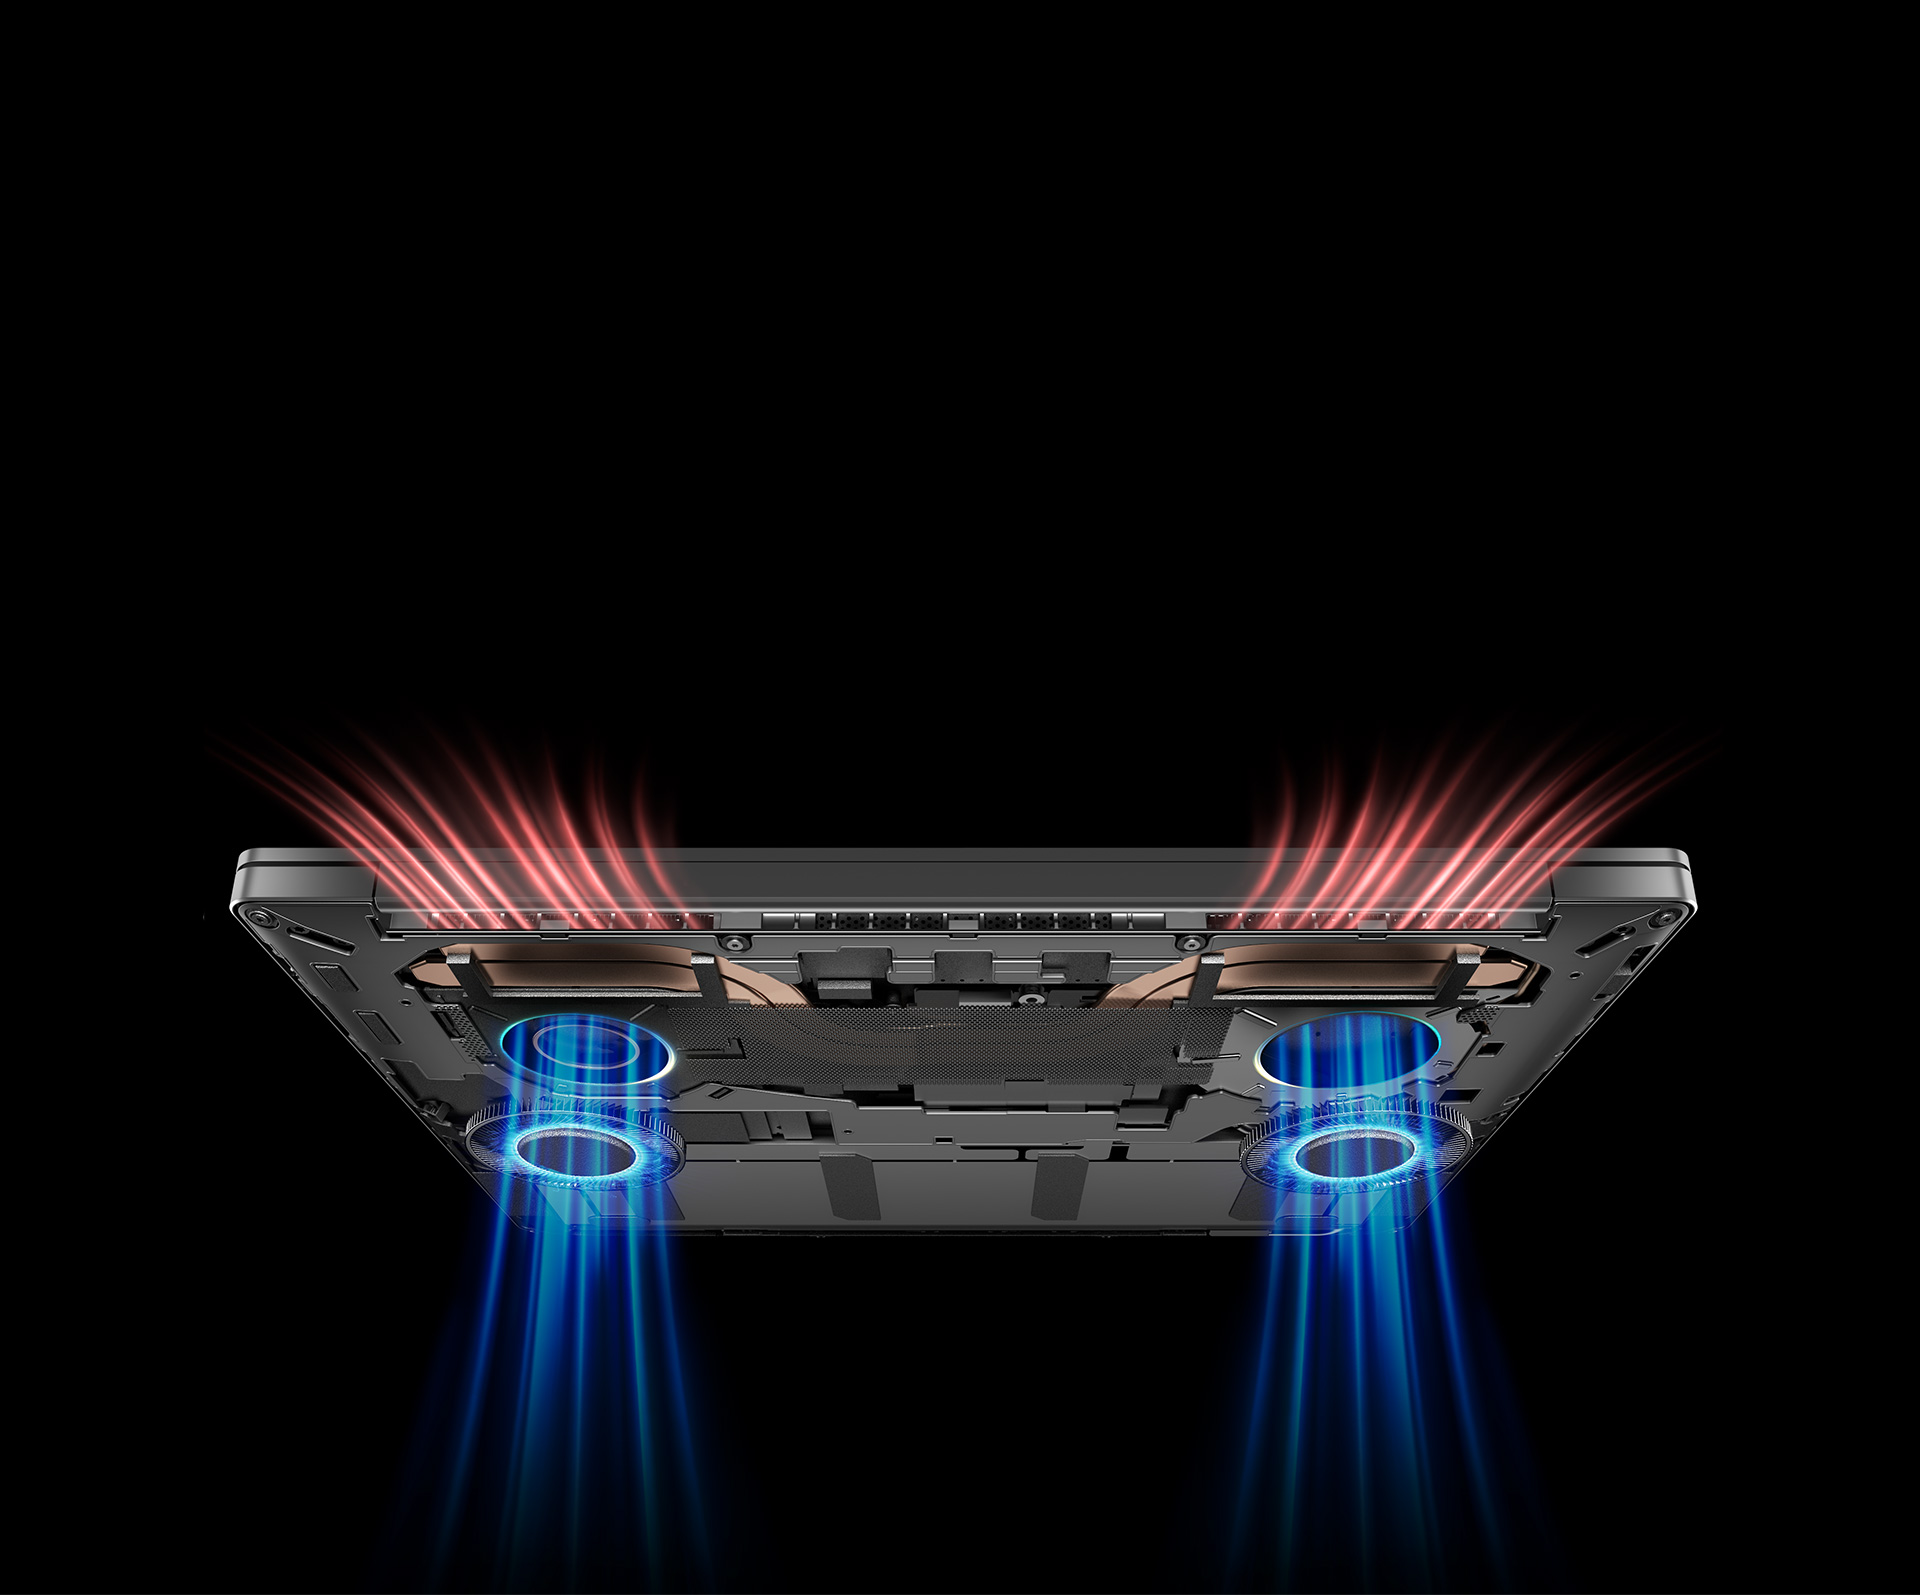 Powerful Heat Dissipation, Keeping You Cool